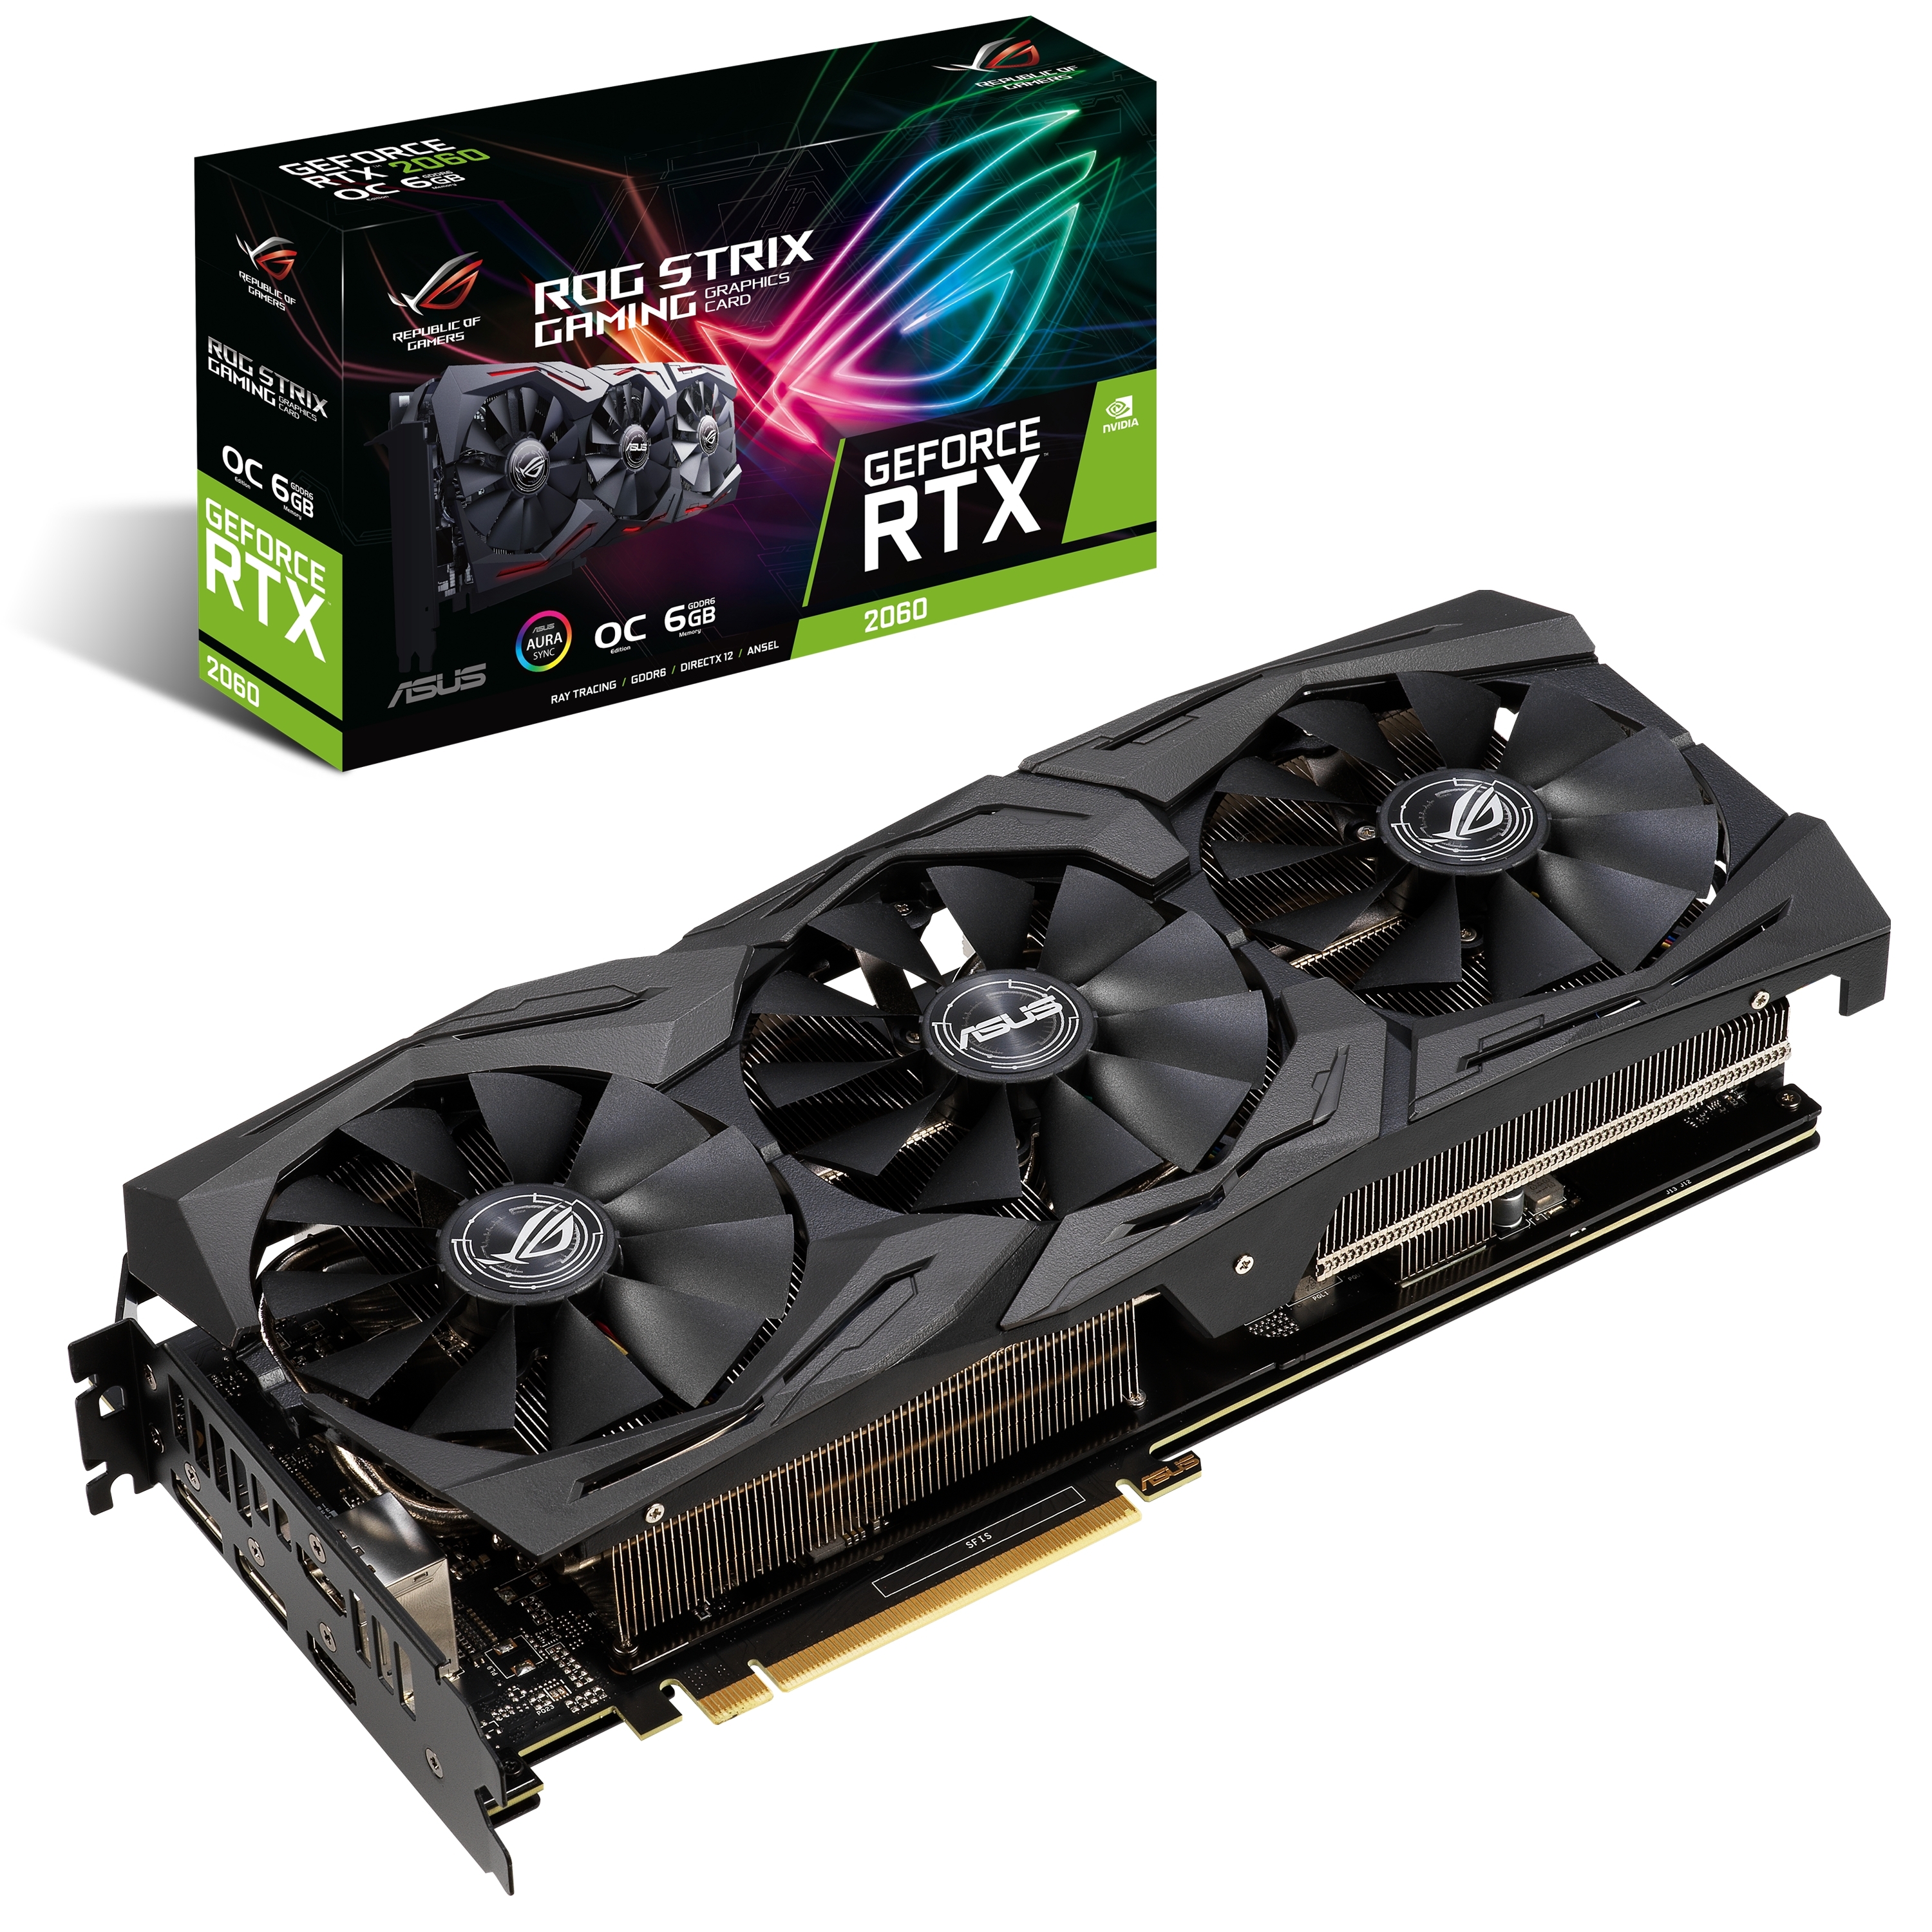 Asus Announces Rog Strix Asus Dual And Turbo Geforce Rtx 2060 Gaming Graphics Cards Business Wire